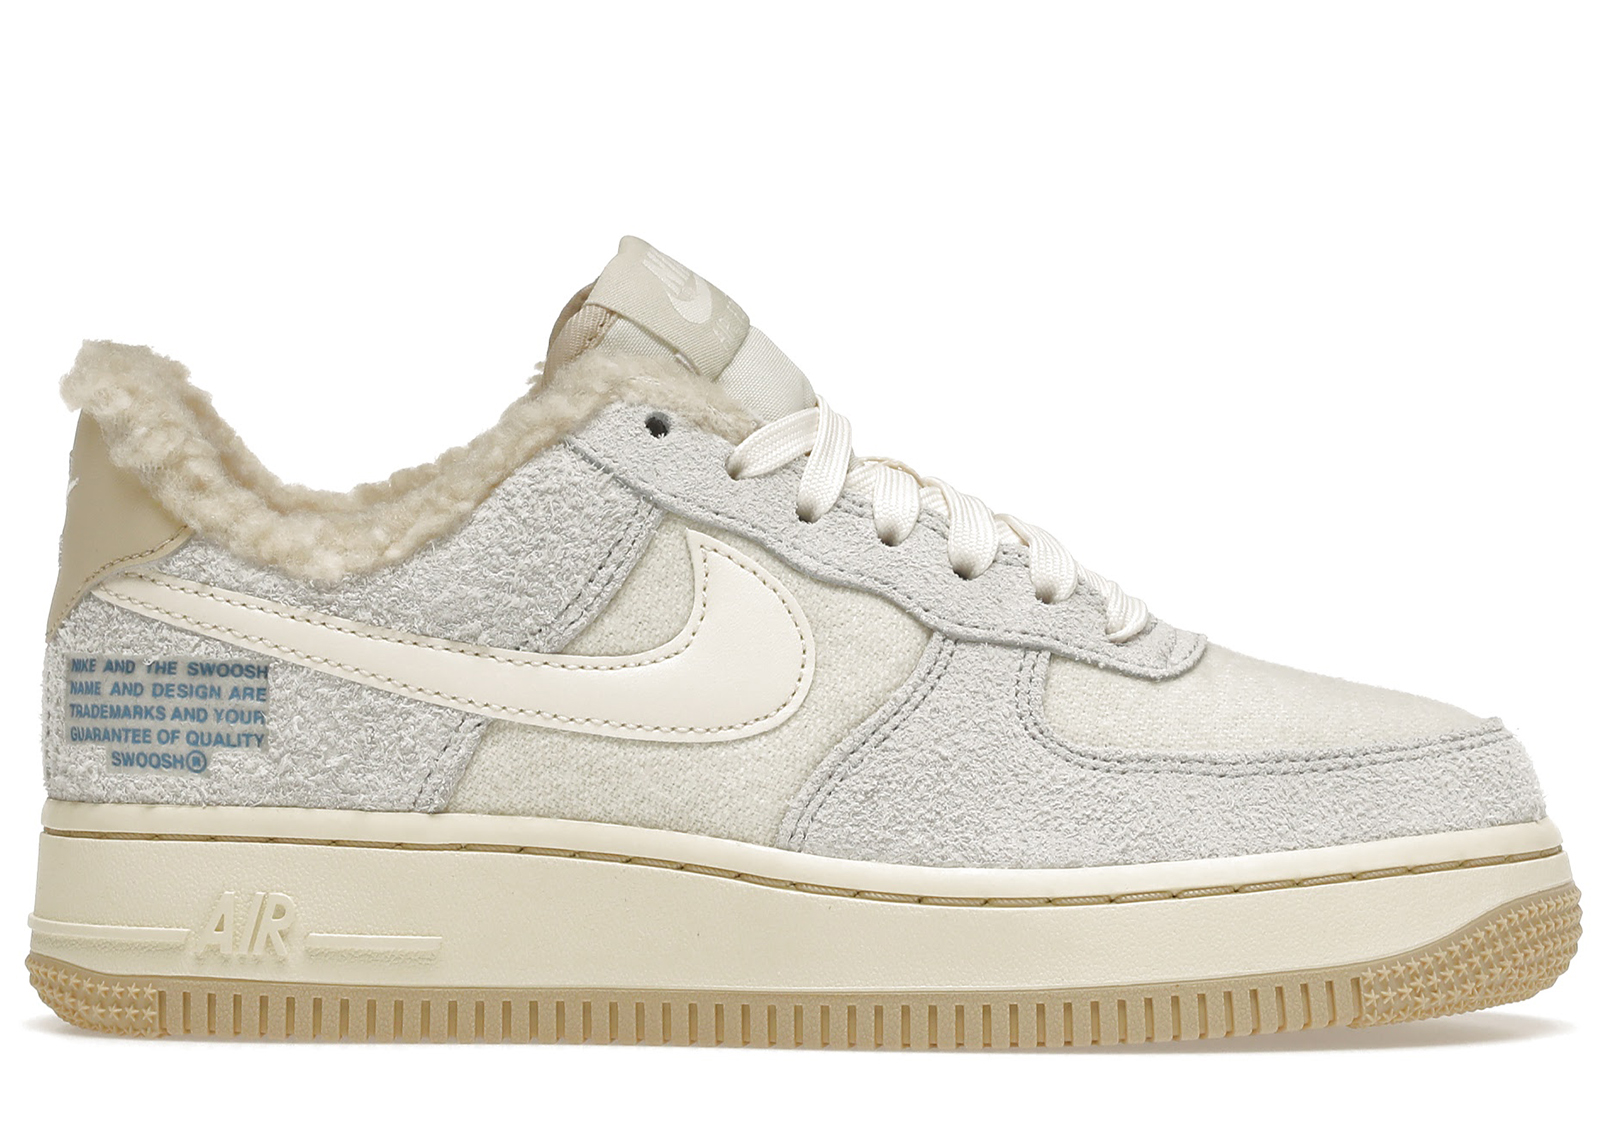 Nike Air Force 1 Low '07 LV8 Sherpa Photon Dust - DO7195-025 - US